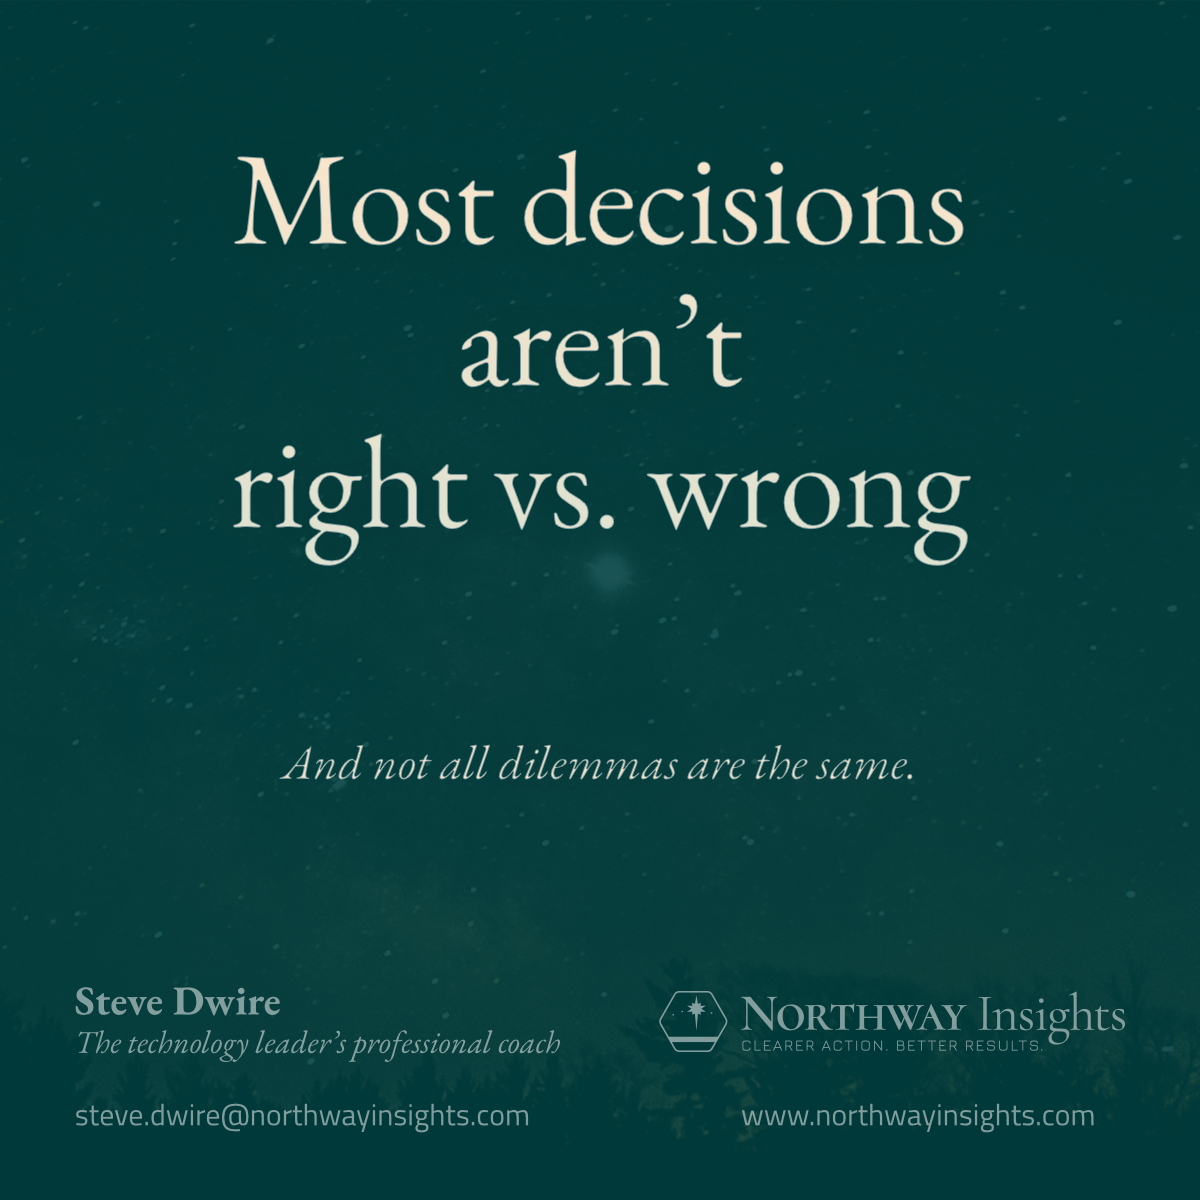 Most decisions aren’t right vs. wrong